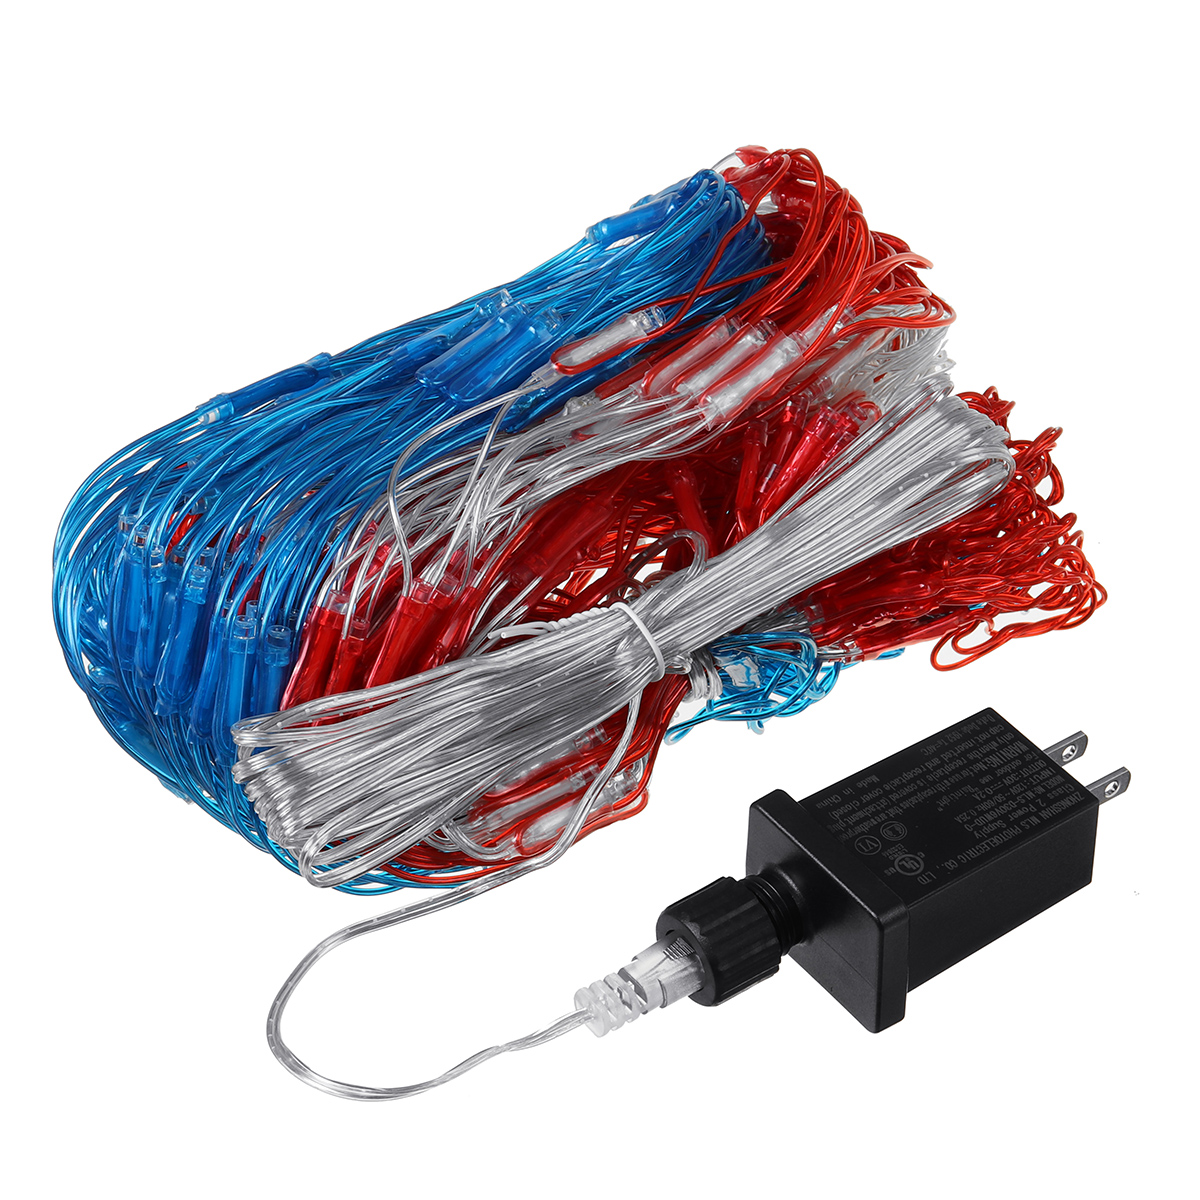 30V-420LEDs-American-Flag-Net-Lamp-Outdoor-Waterproof-String-Light-Yard-Home-Holiday-Decoration-US-P-1732818-3